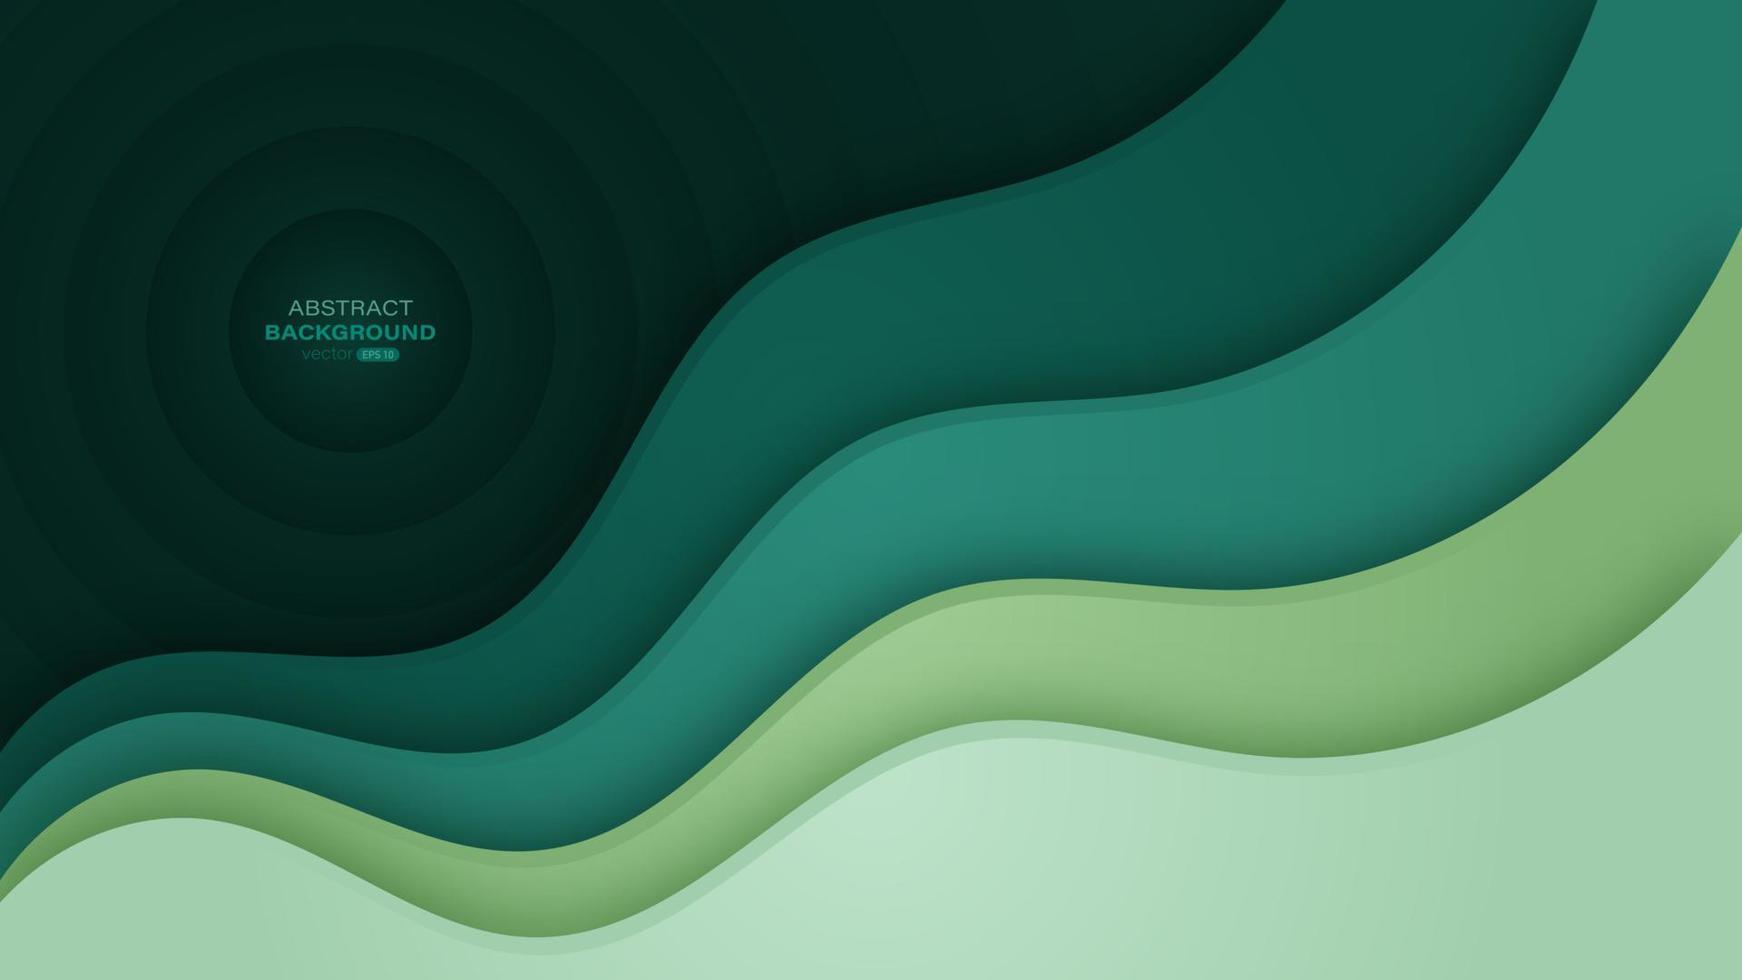 Abstract green paper cut with wavy layers background vector